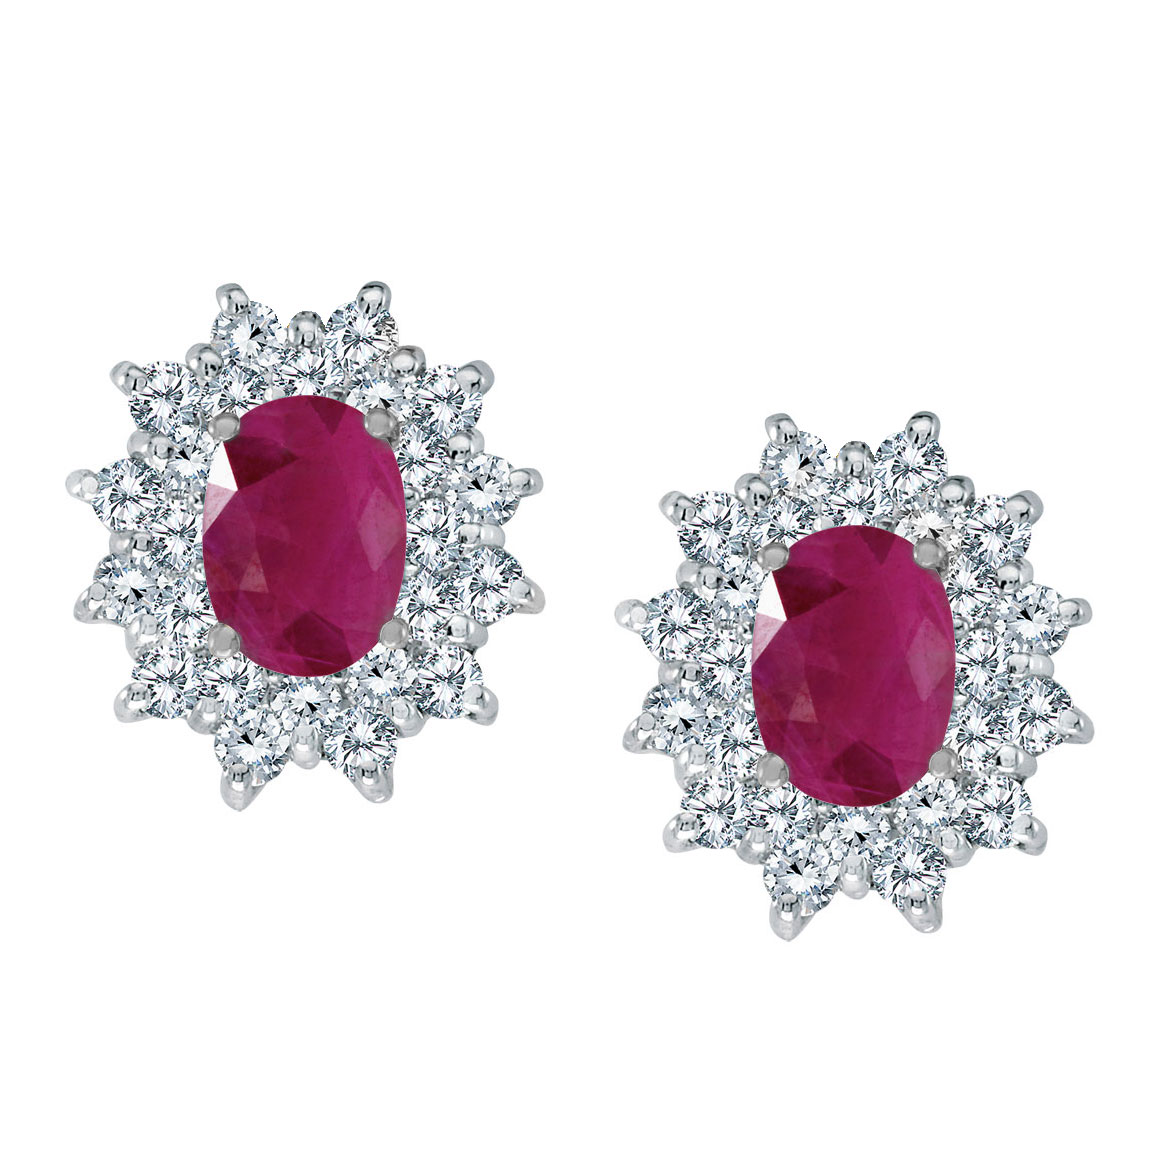 JCX2288: Bright 14k white gold earrings featuring 7x5 mm rubies surrounded by 1.00 total carat of scintillating diamonds.